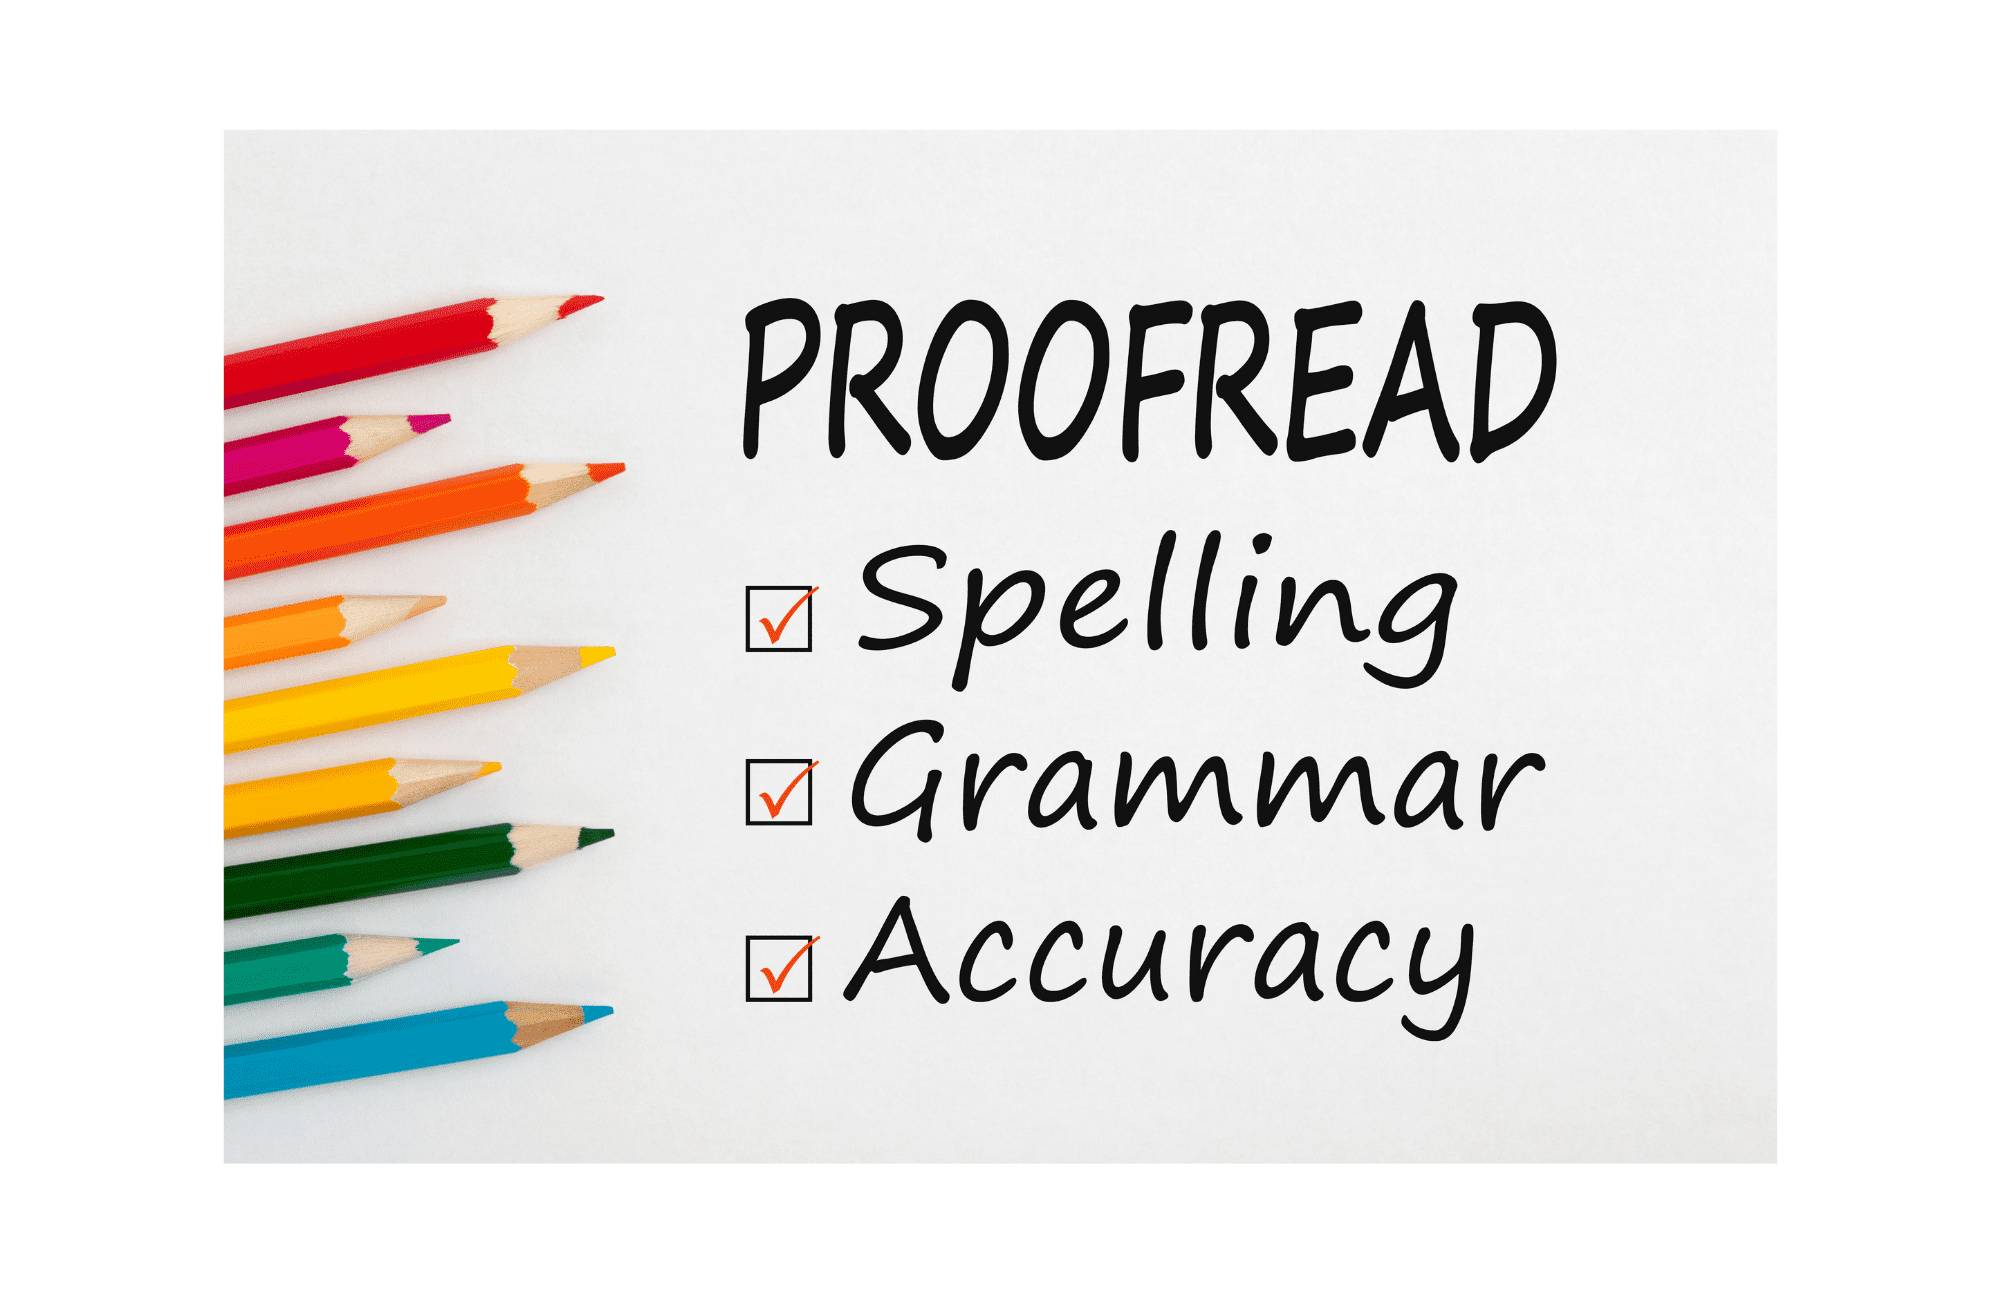 book editing and proofreading services